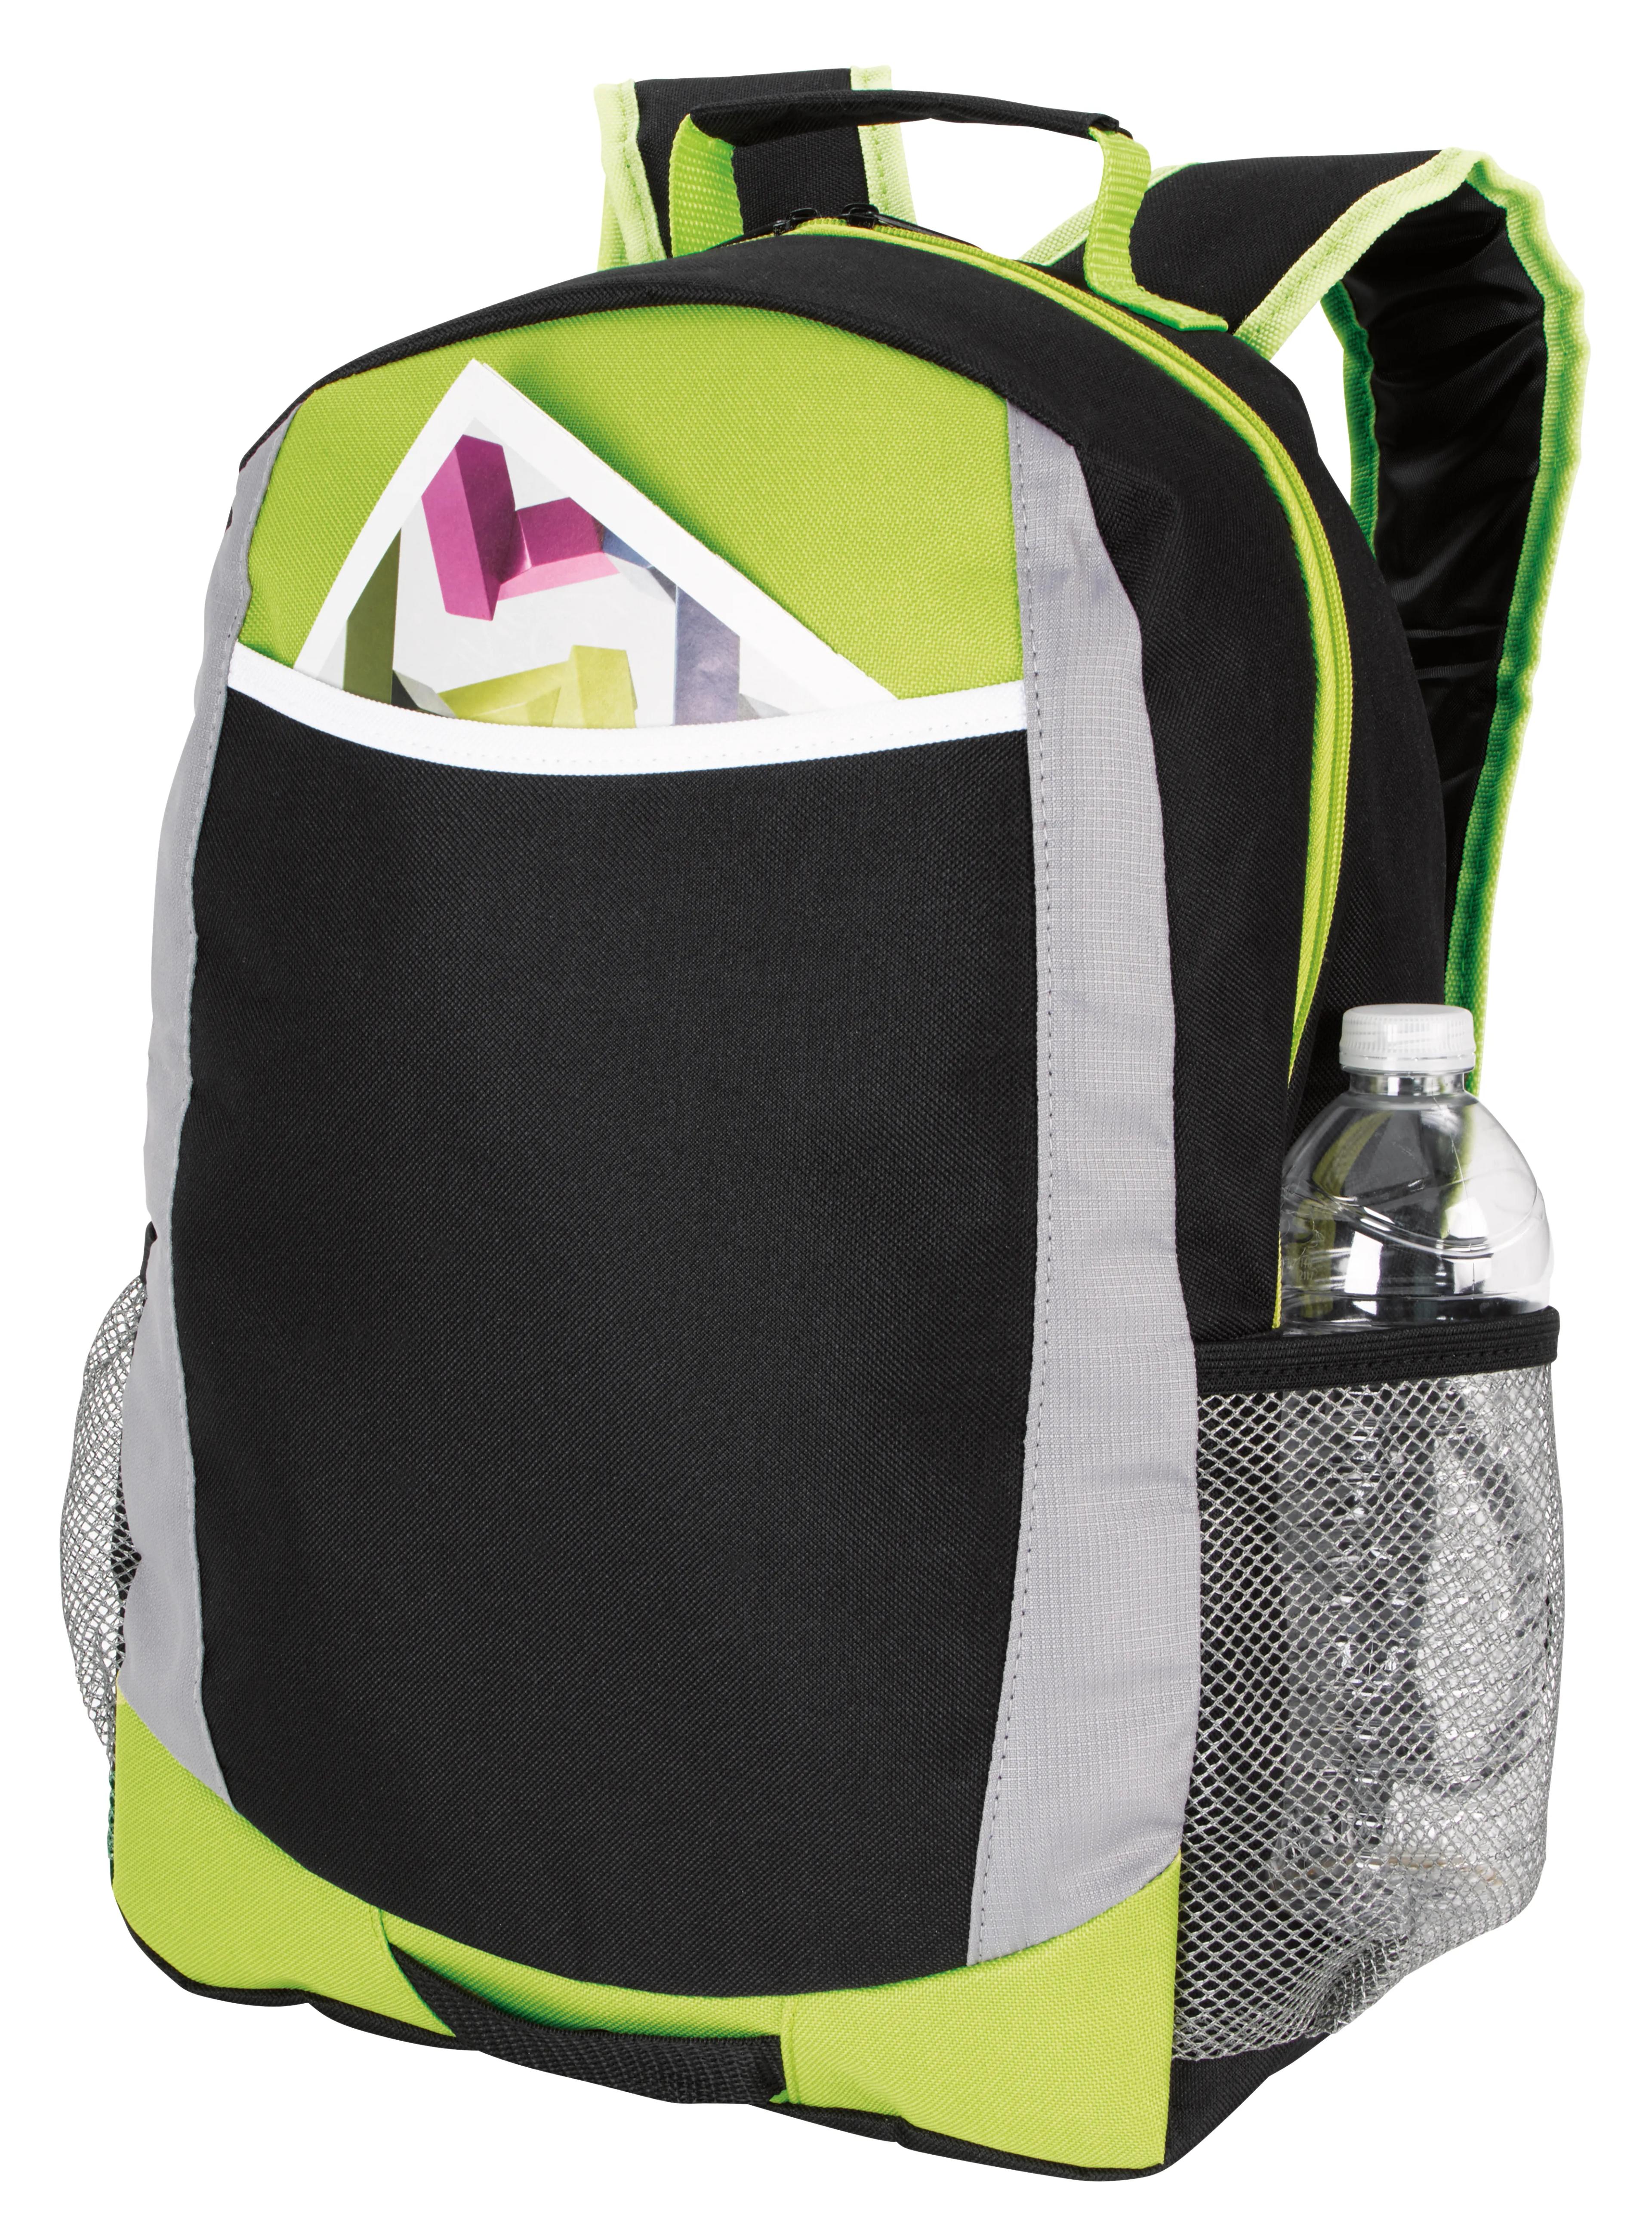 Primary Sport Backpack 6 of 14